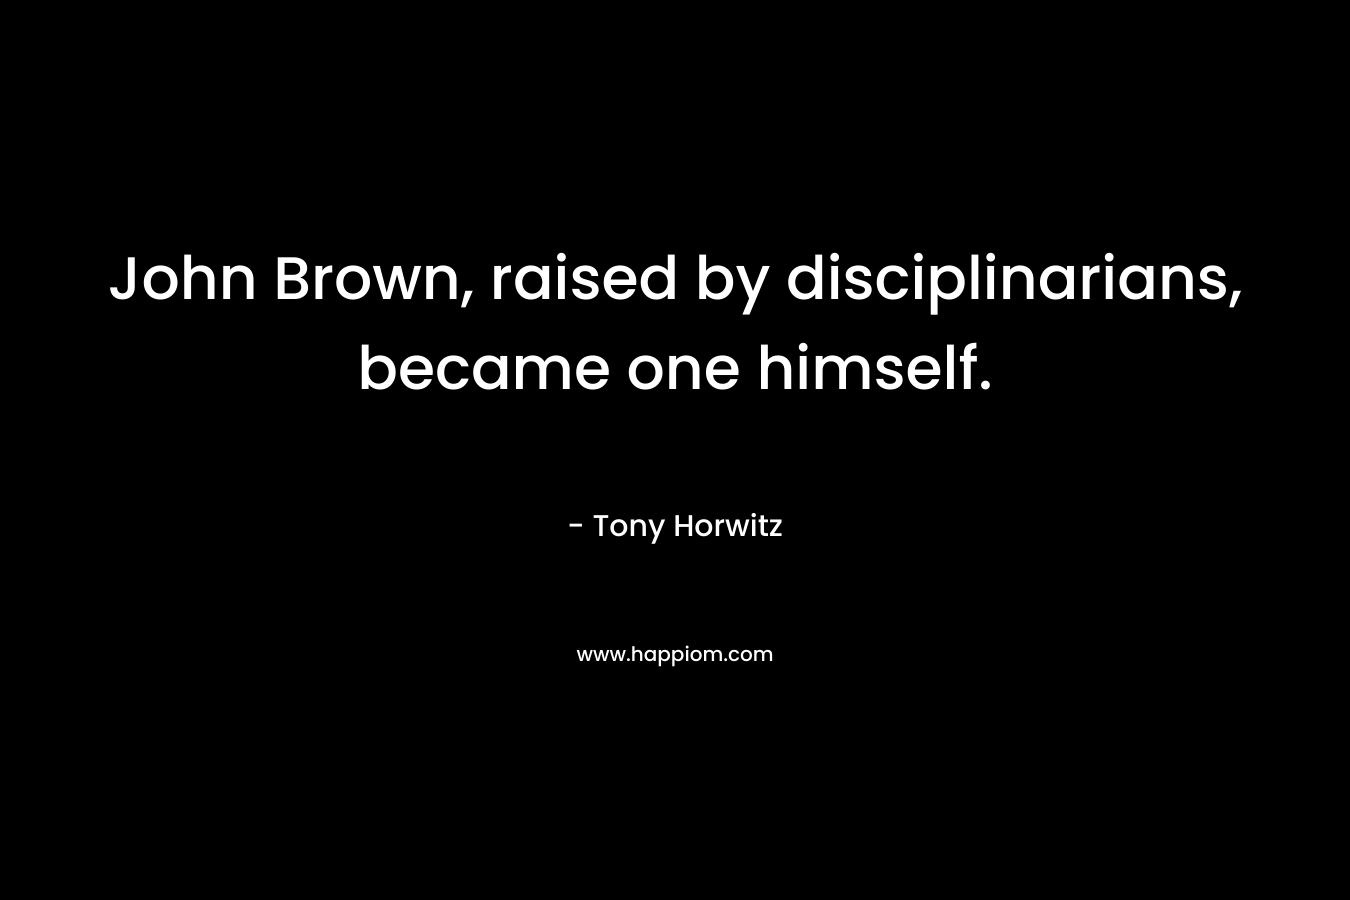 John Brown, raised by disciplinarians, became one himself. – Tony Horwitz